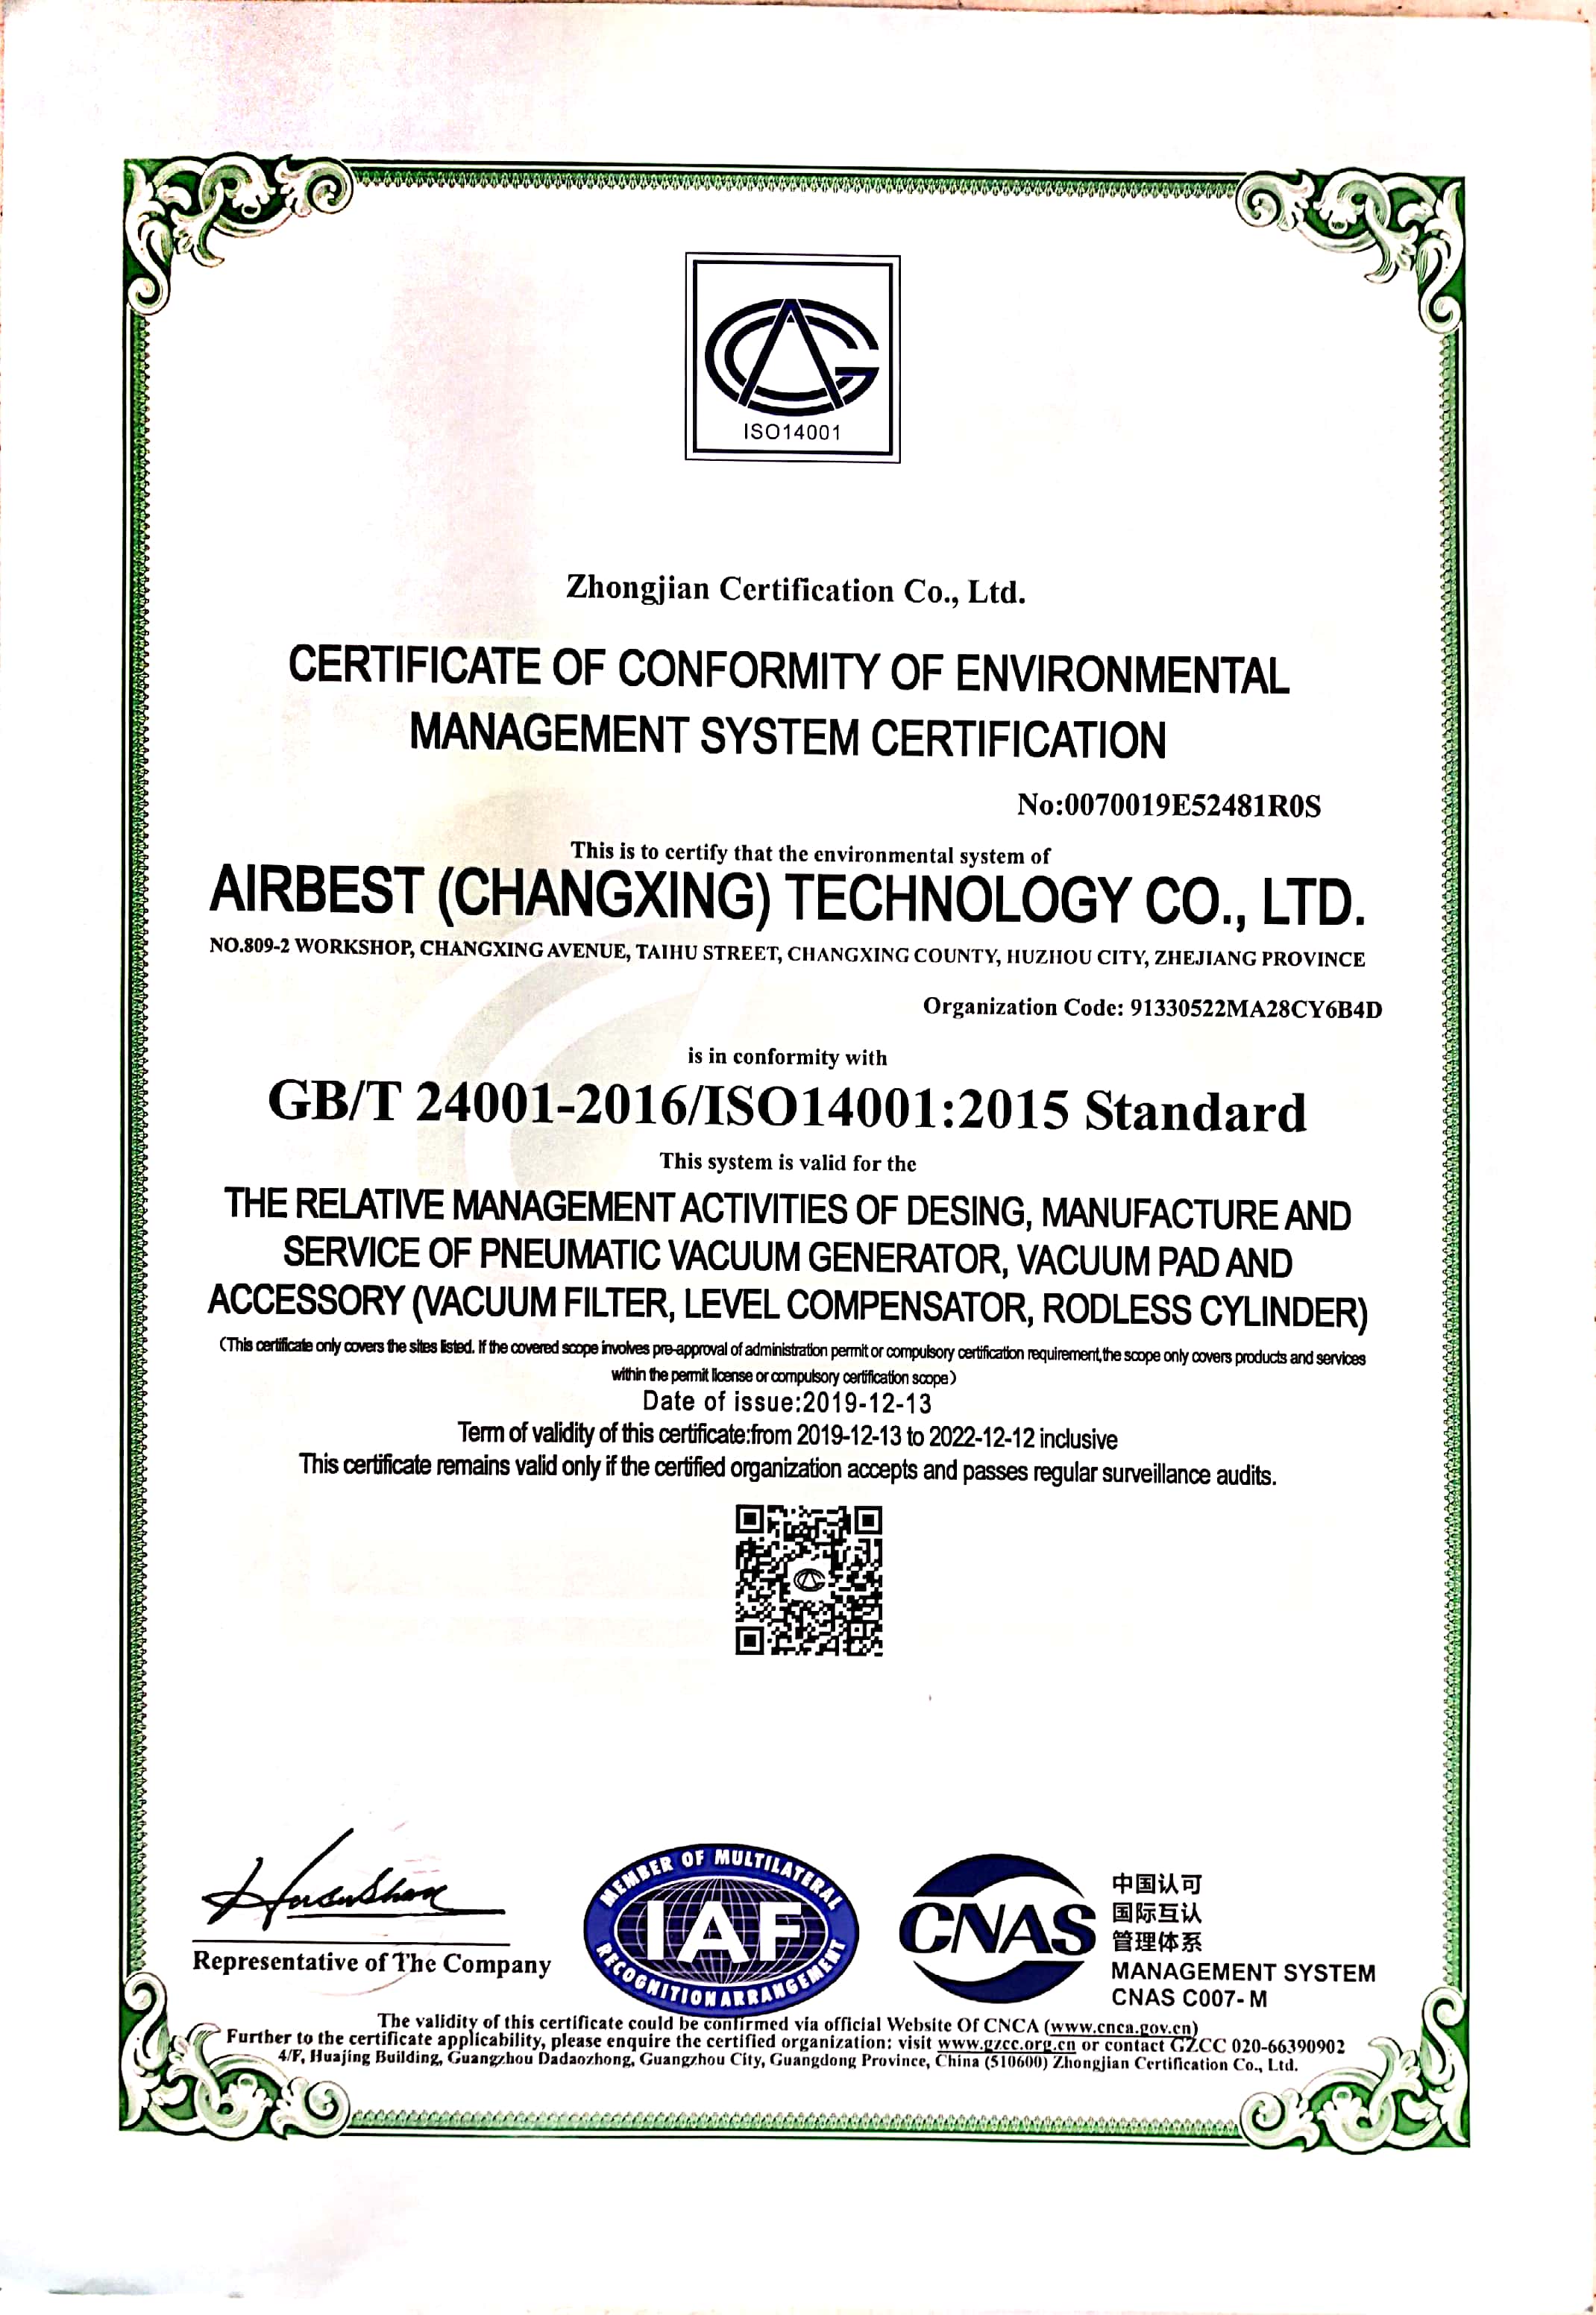 Renew audition of certificate of conformity of environmental management system certification